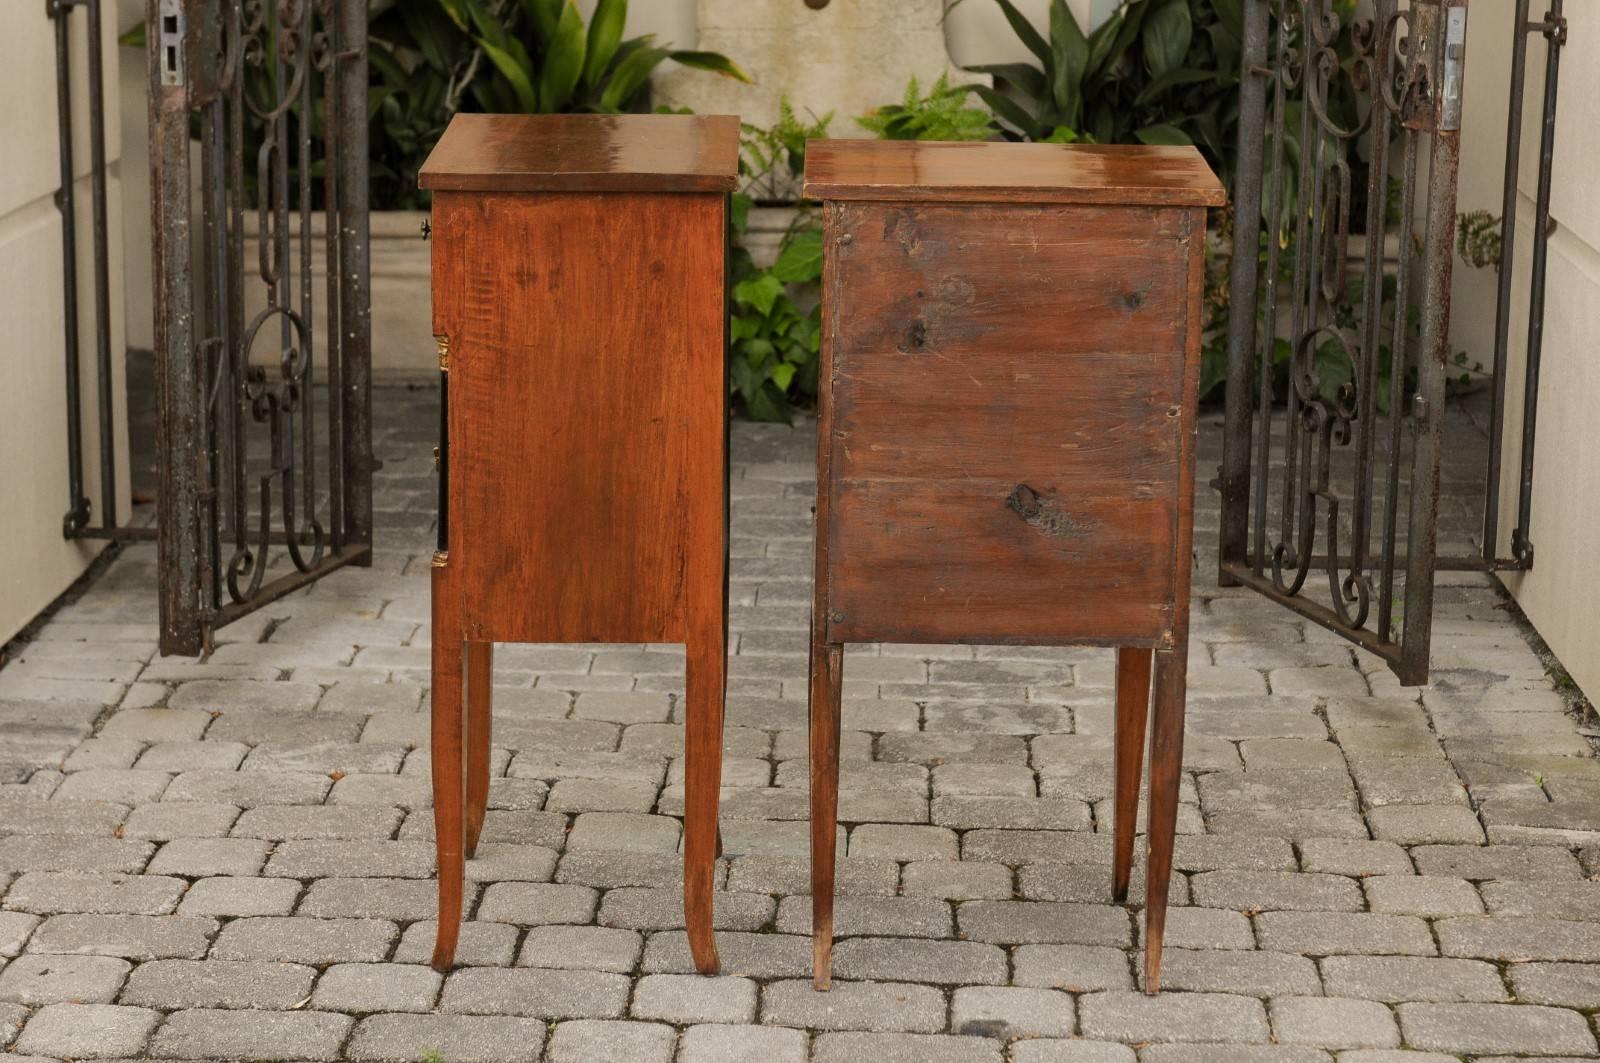 Pair of 1840s Biedermeier Walnut Stands with Drawer, Door and Semi-Columns For Sale 3